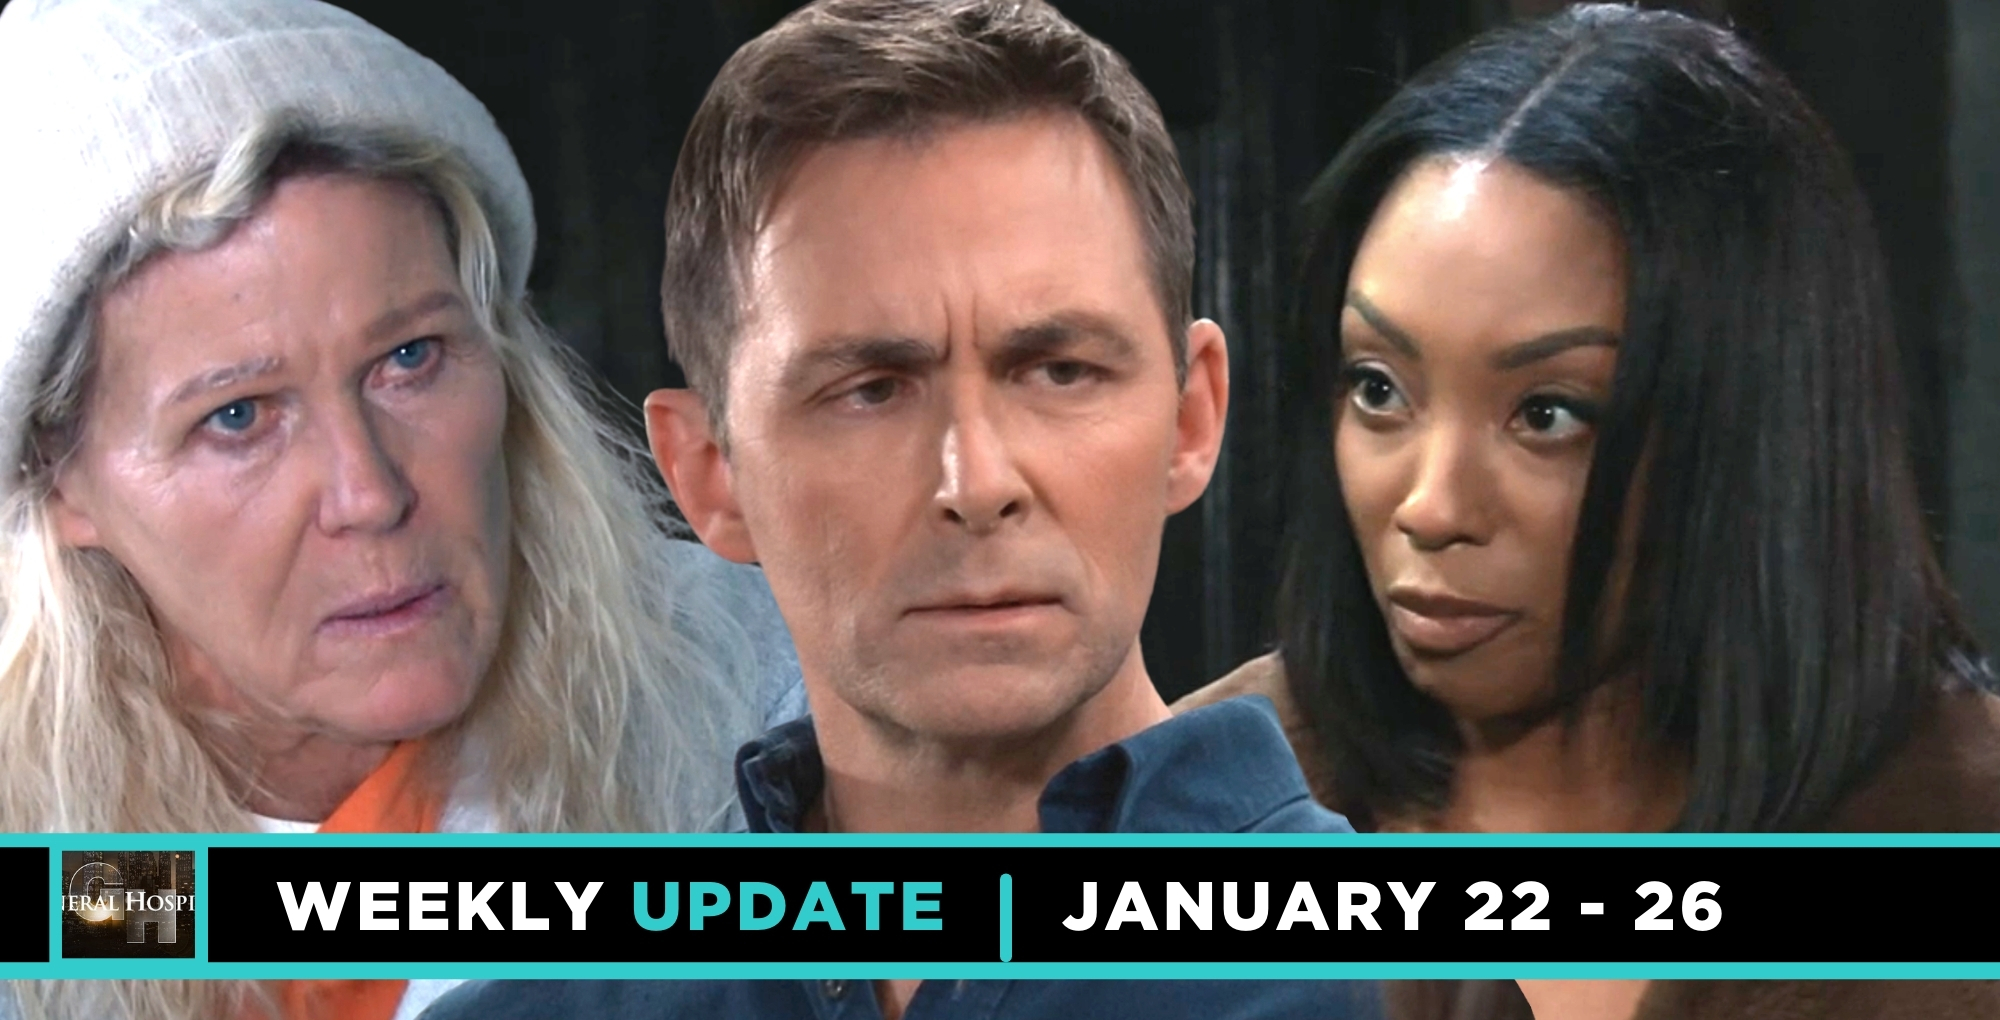 gh spoilers weekly update for january 22-26, heather, valentin, and jordan.